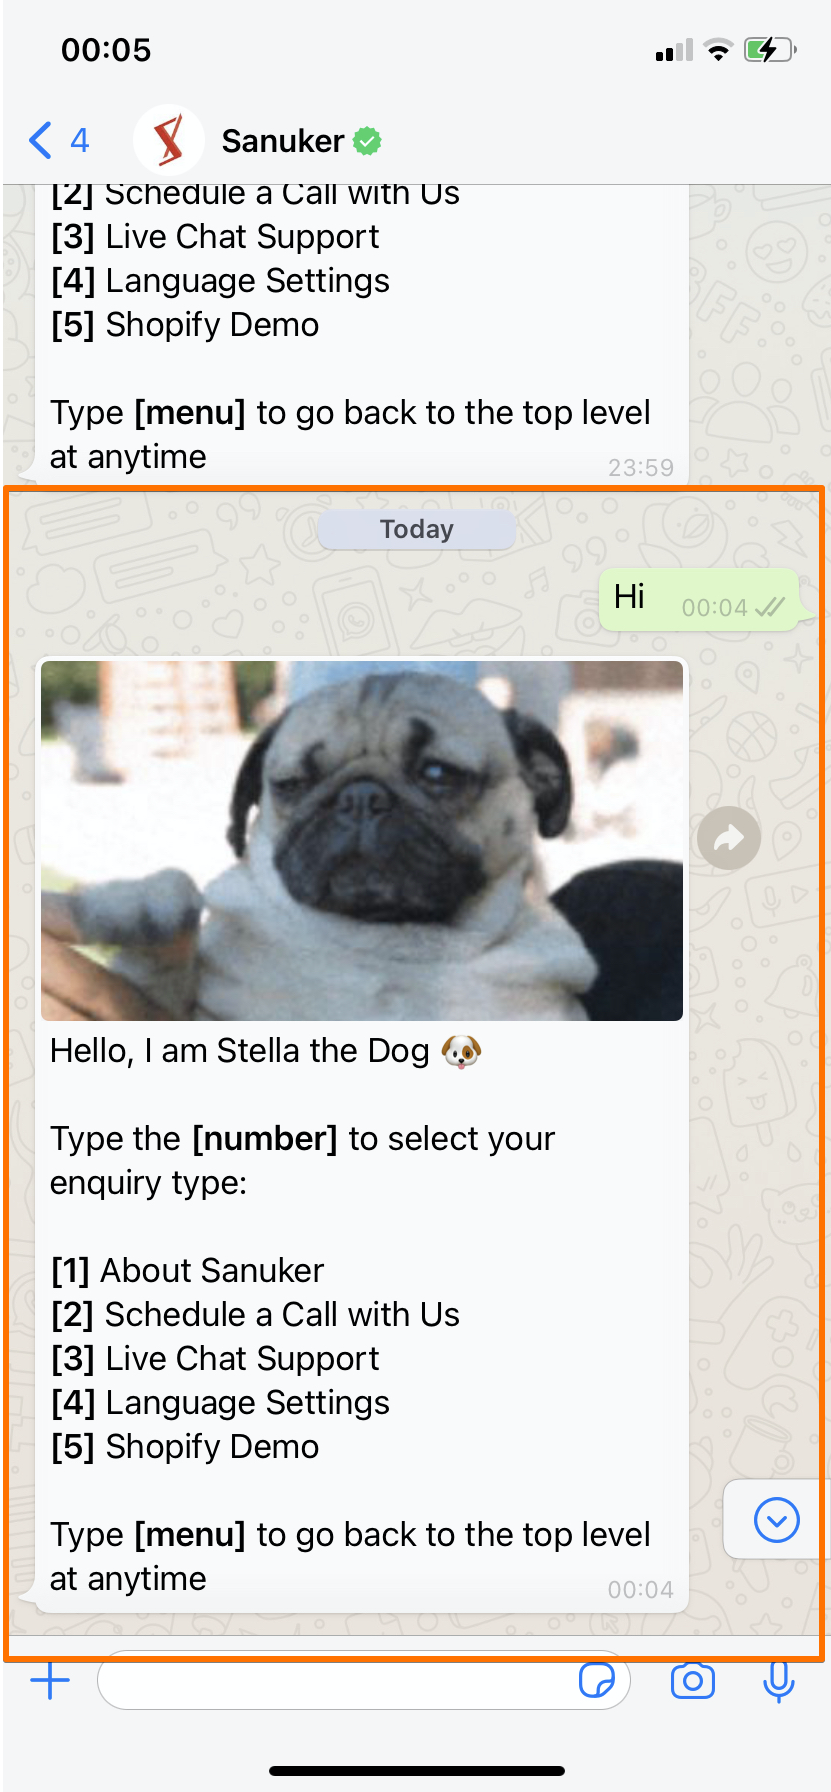 User greets chatbot again